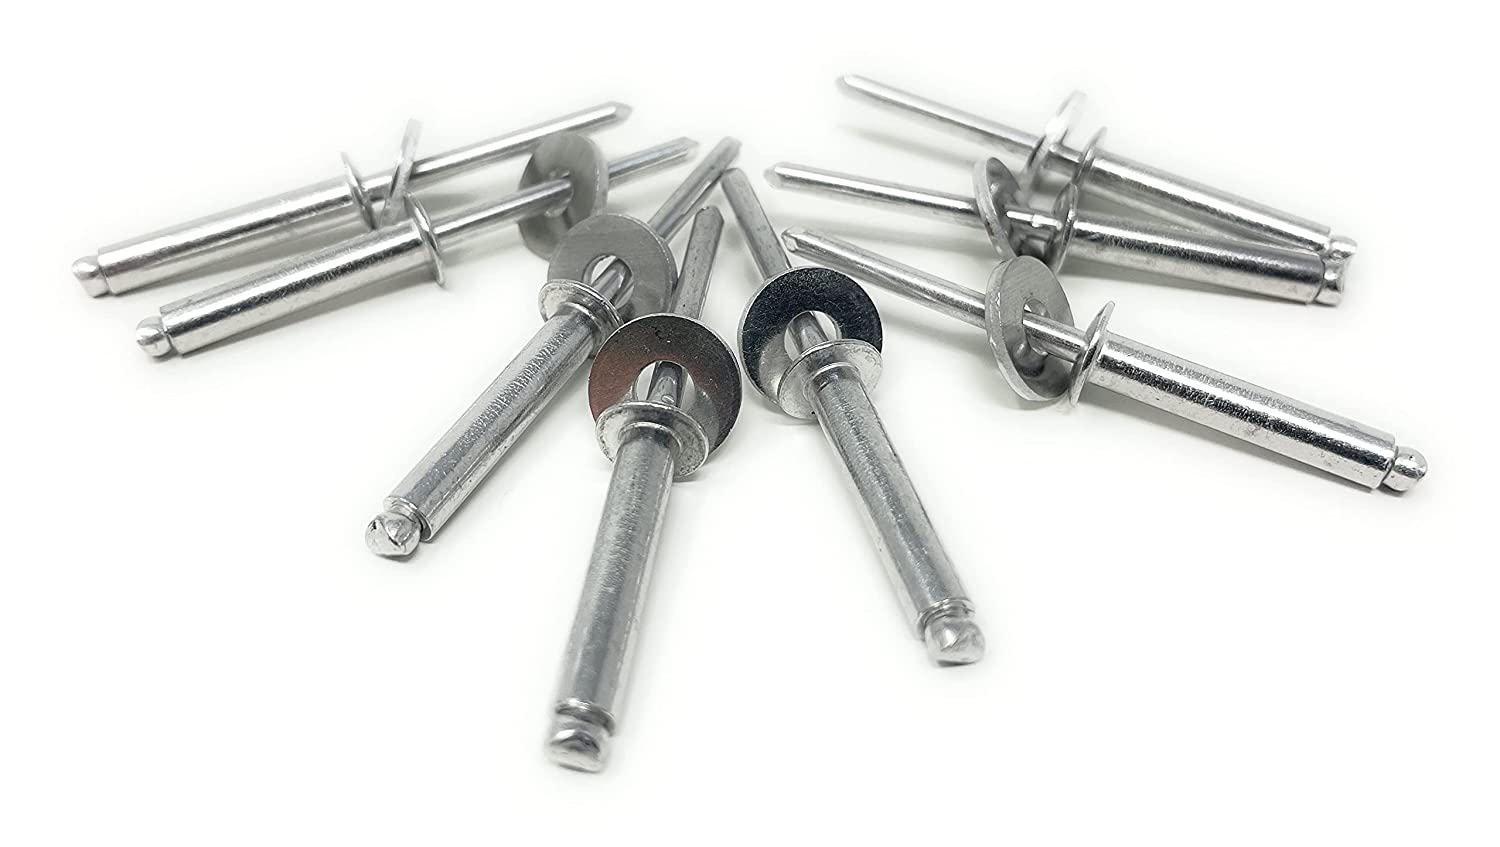 Stainless Steel Pop Rivet Kit with Washers